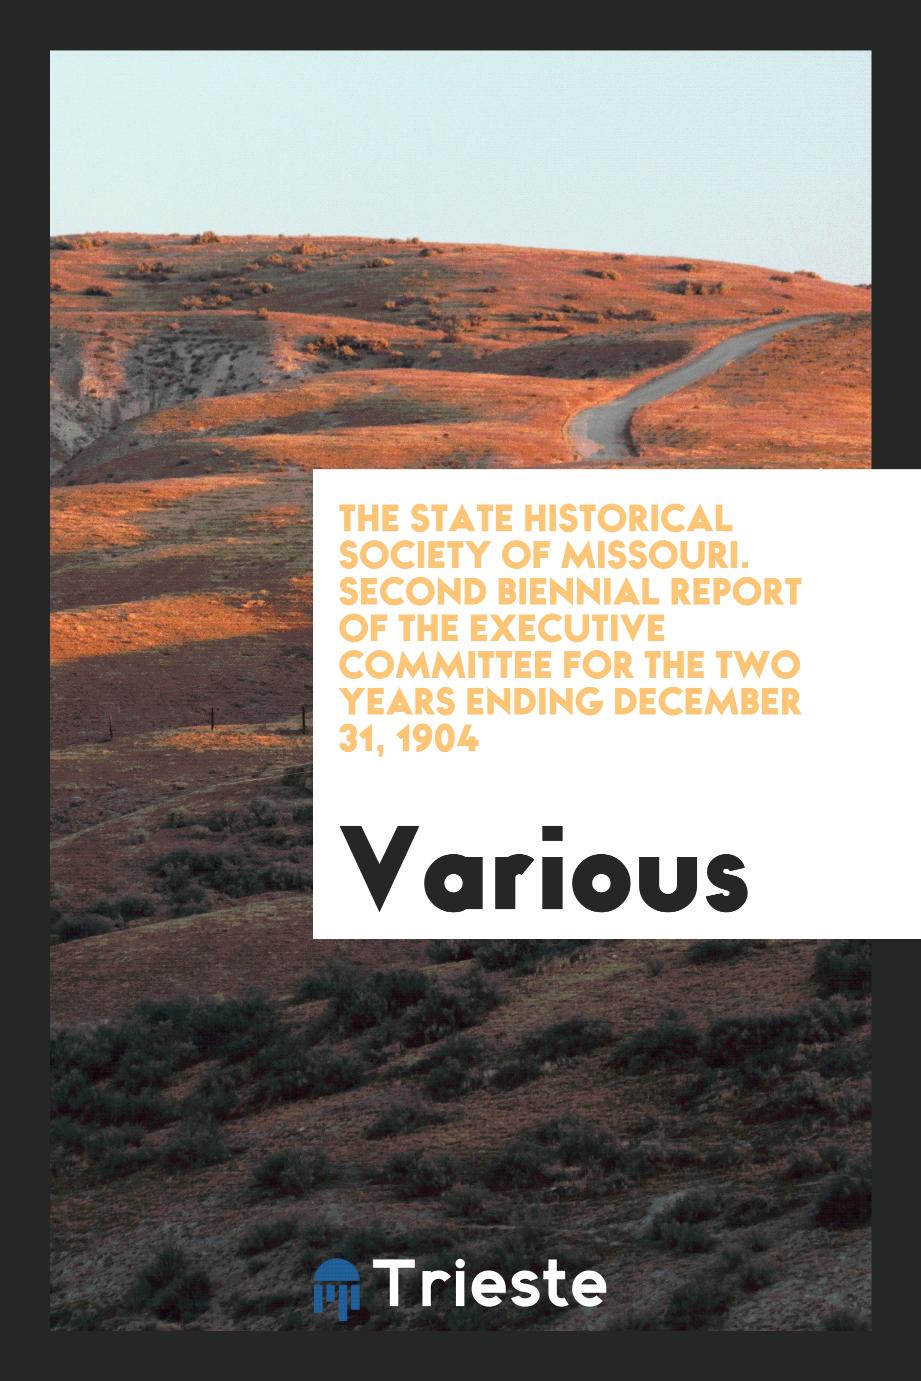 The State Historical Society of Missouri. Second Biennial report of the executive committee for the two years ending december 31, 1904